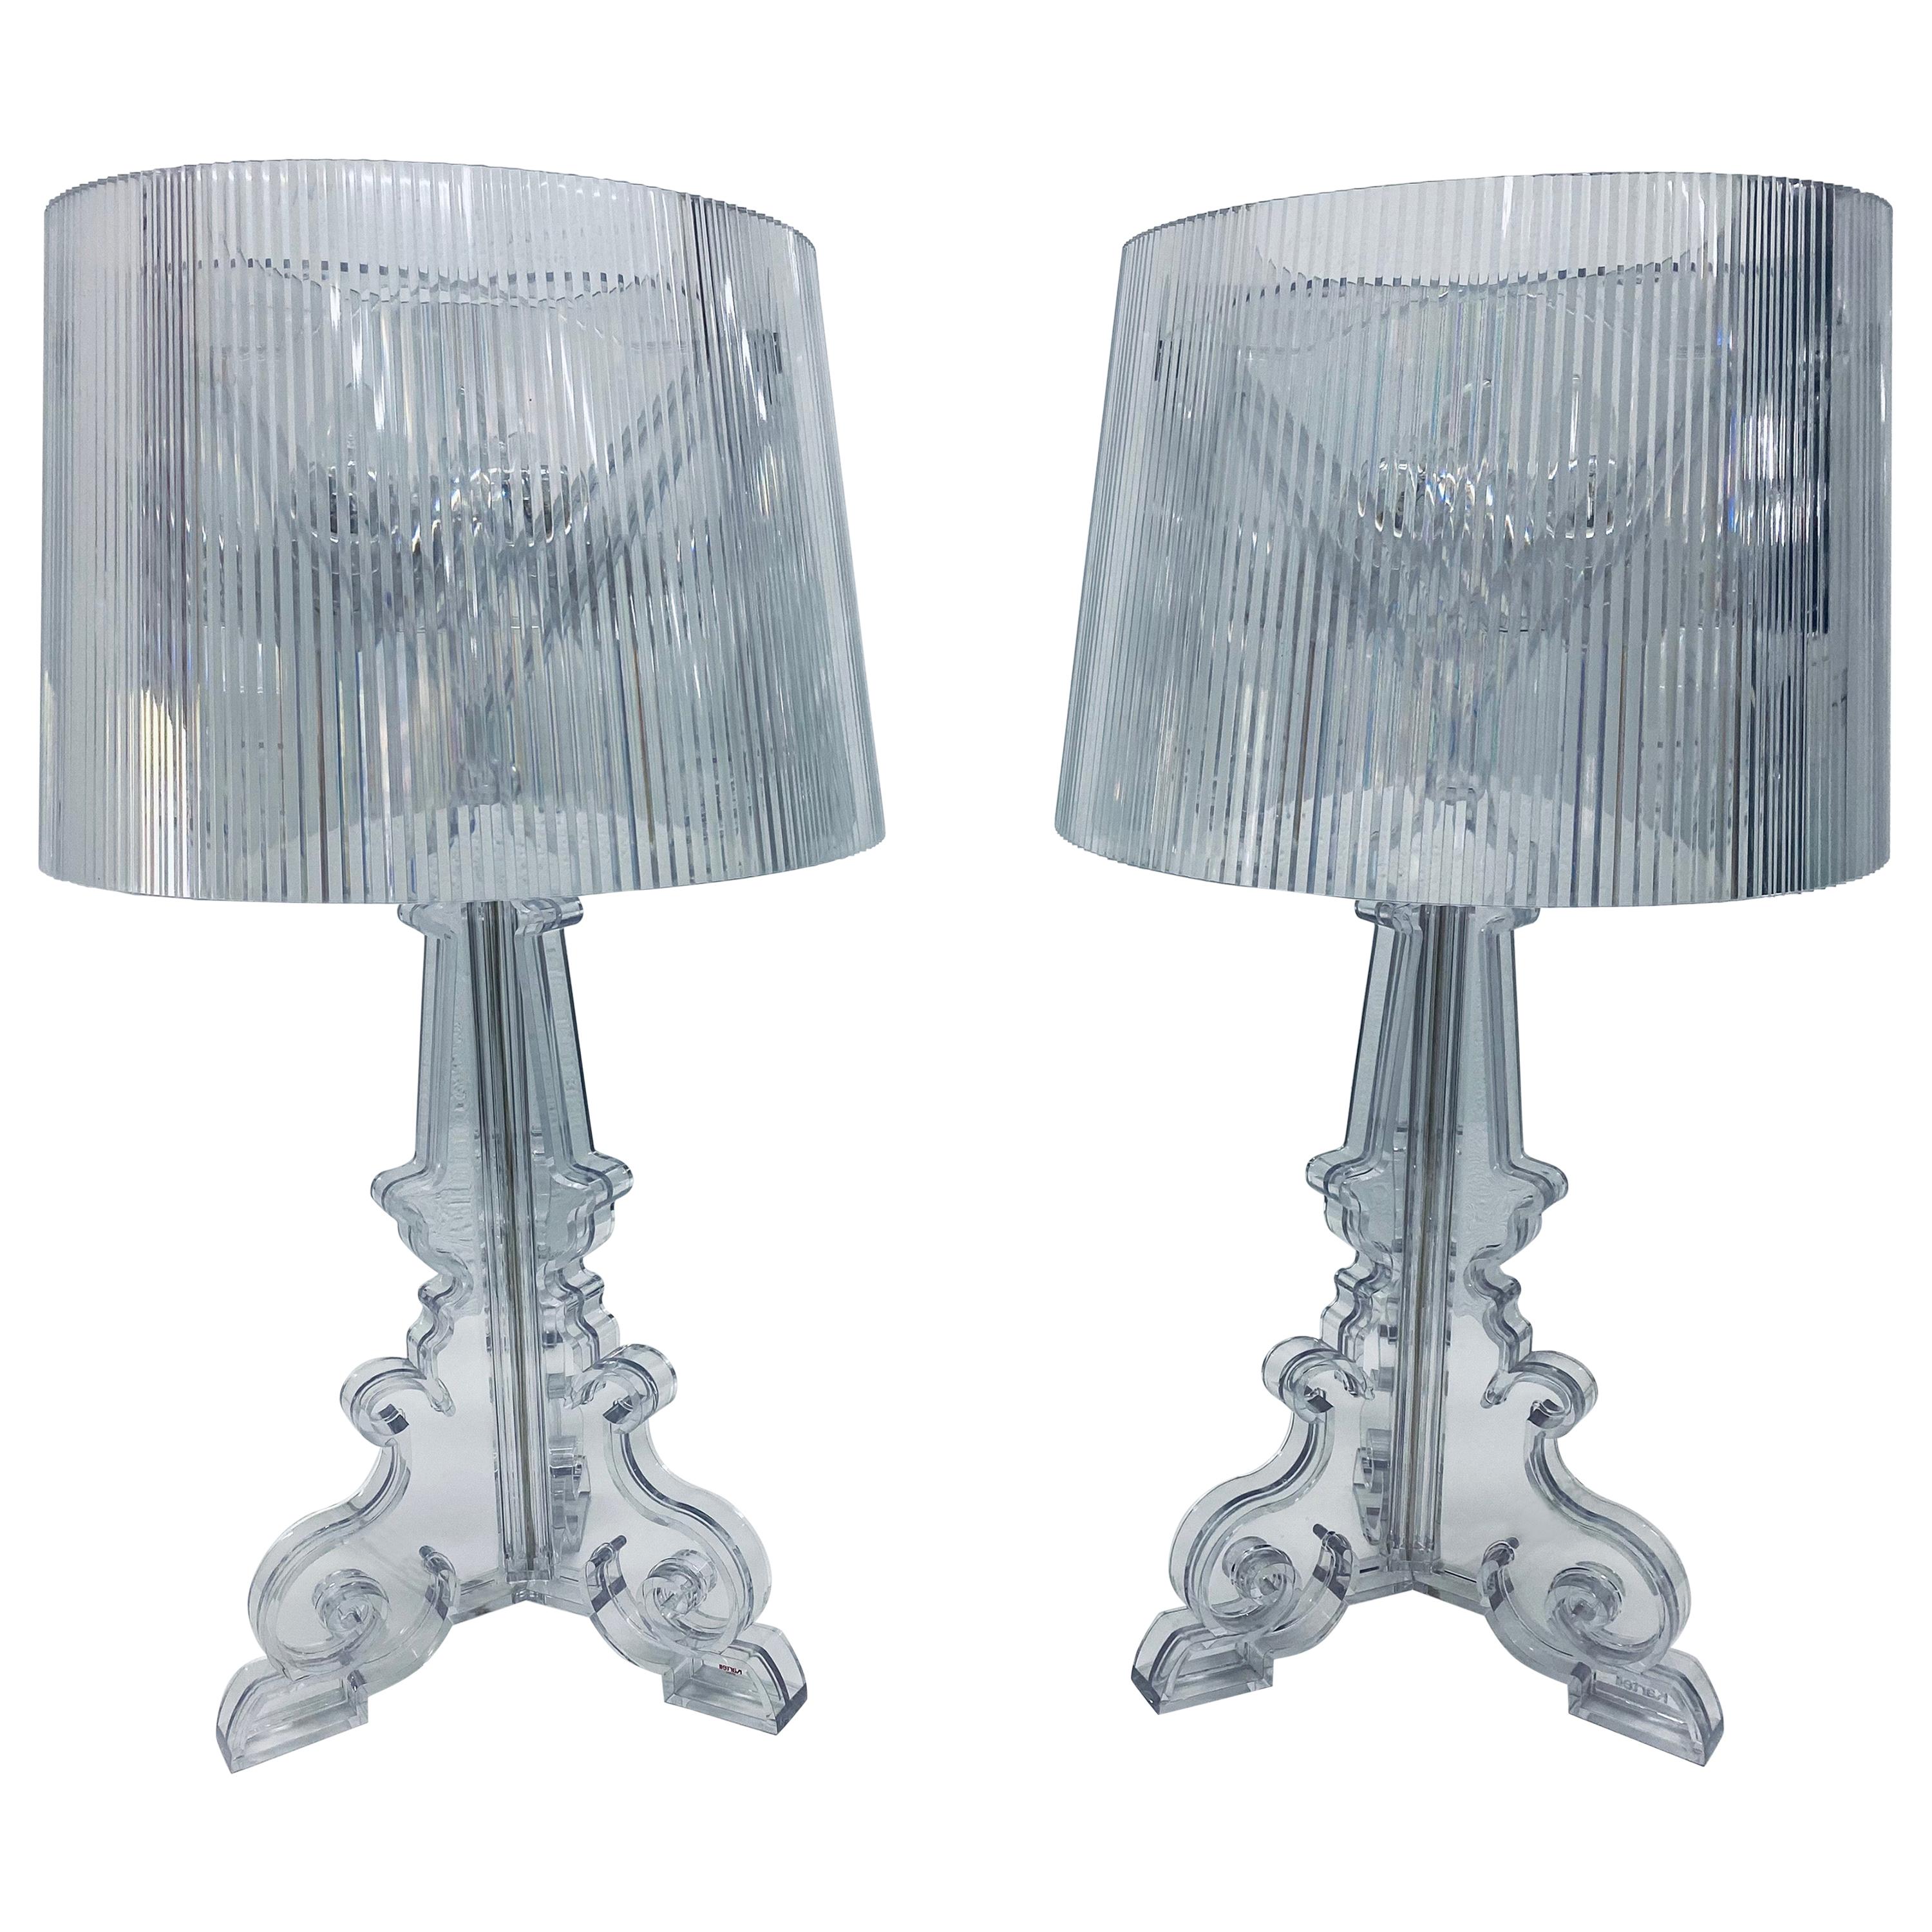 Ferruccio Laviani Crystal "Bourgie" Lamps for Kartell, a Pair